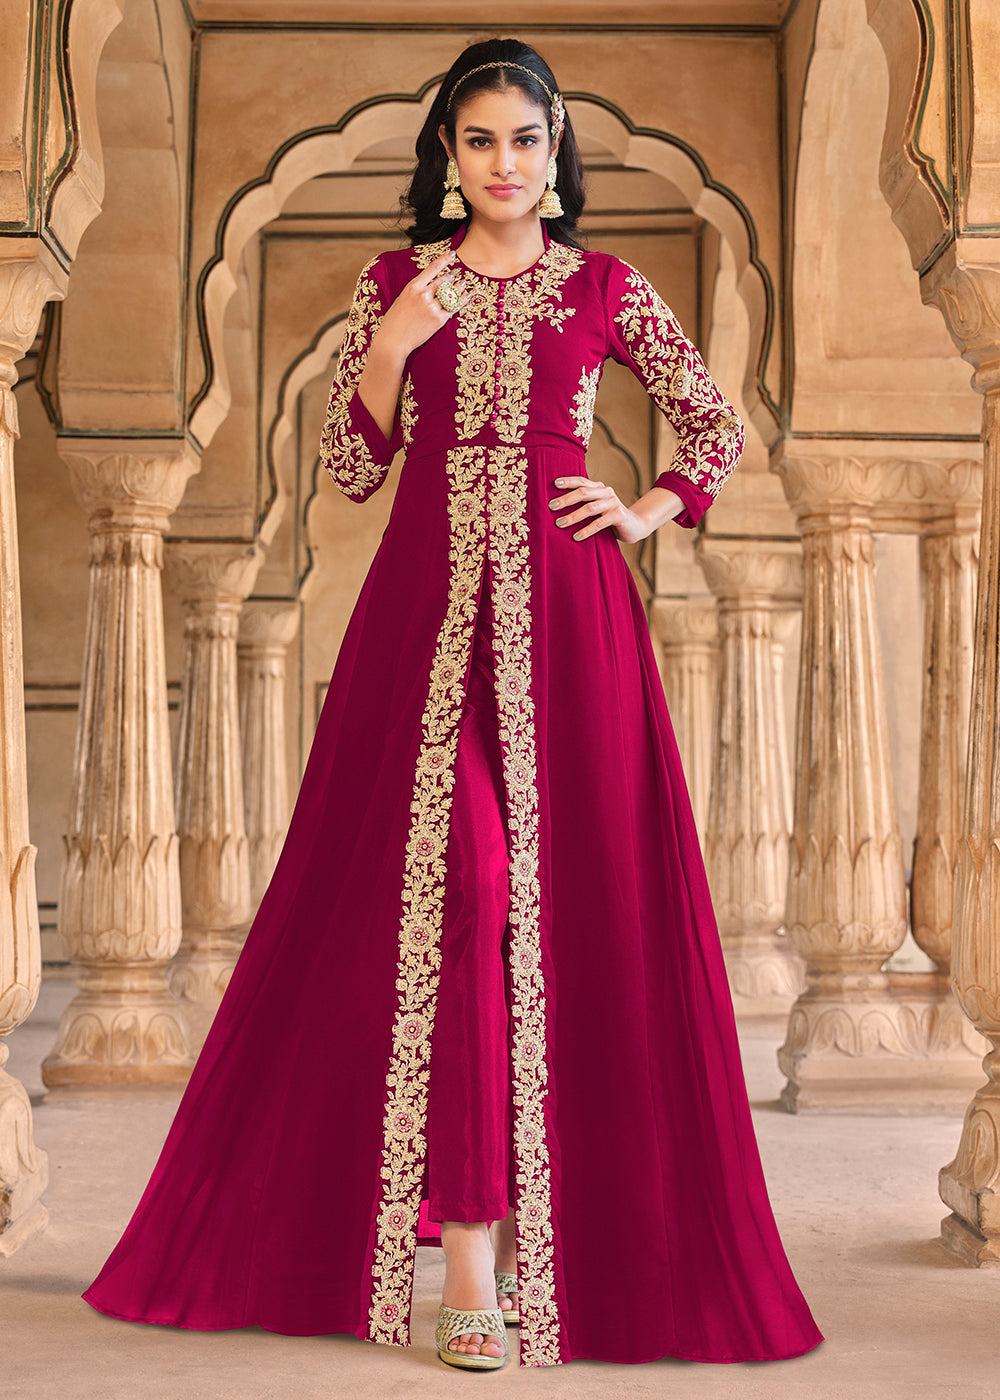 Buy Now Stone Embroidered Lovely Hot Pink Slit Style Anarkali Suit Online in USA, UK, Australia, New Zealand, Canada, Italy & Worldwide at Empress Clothing.